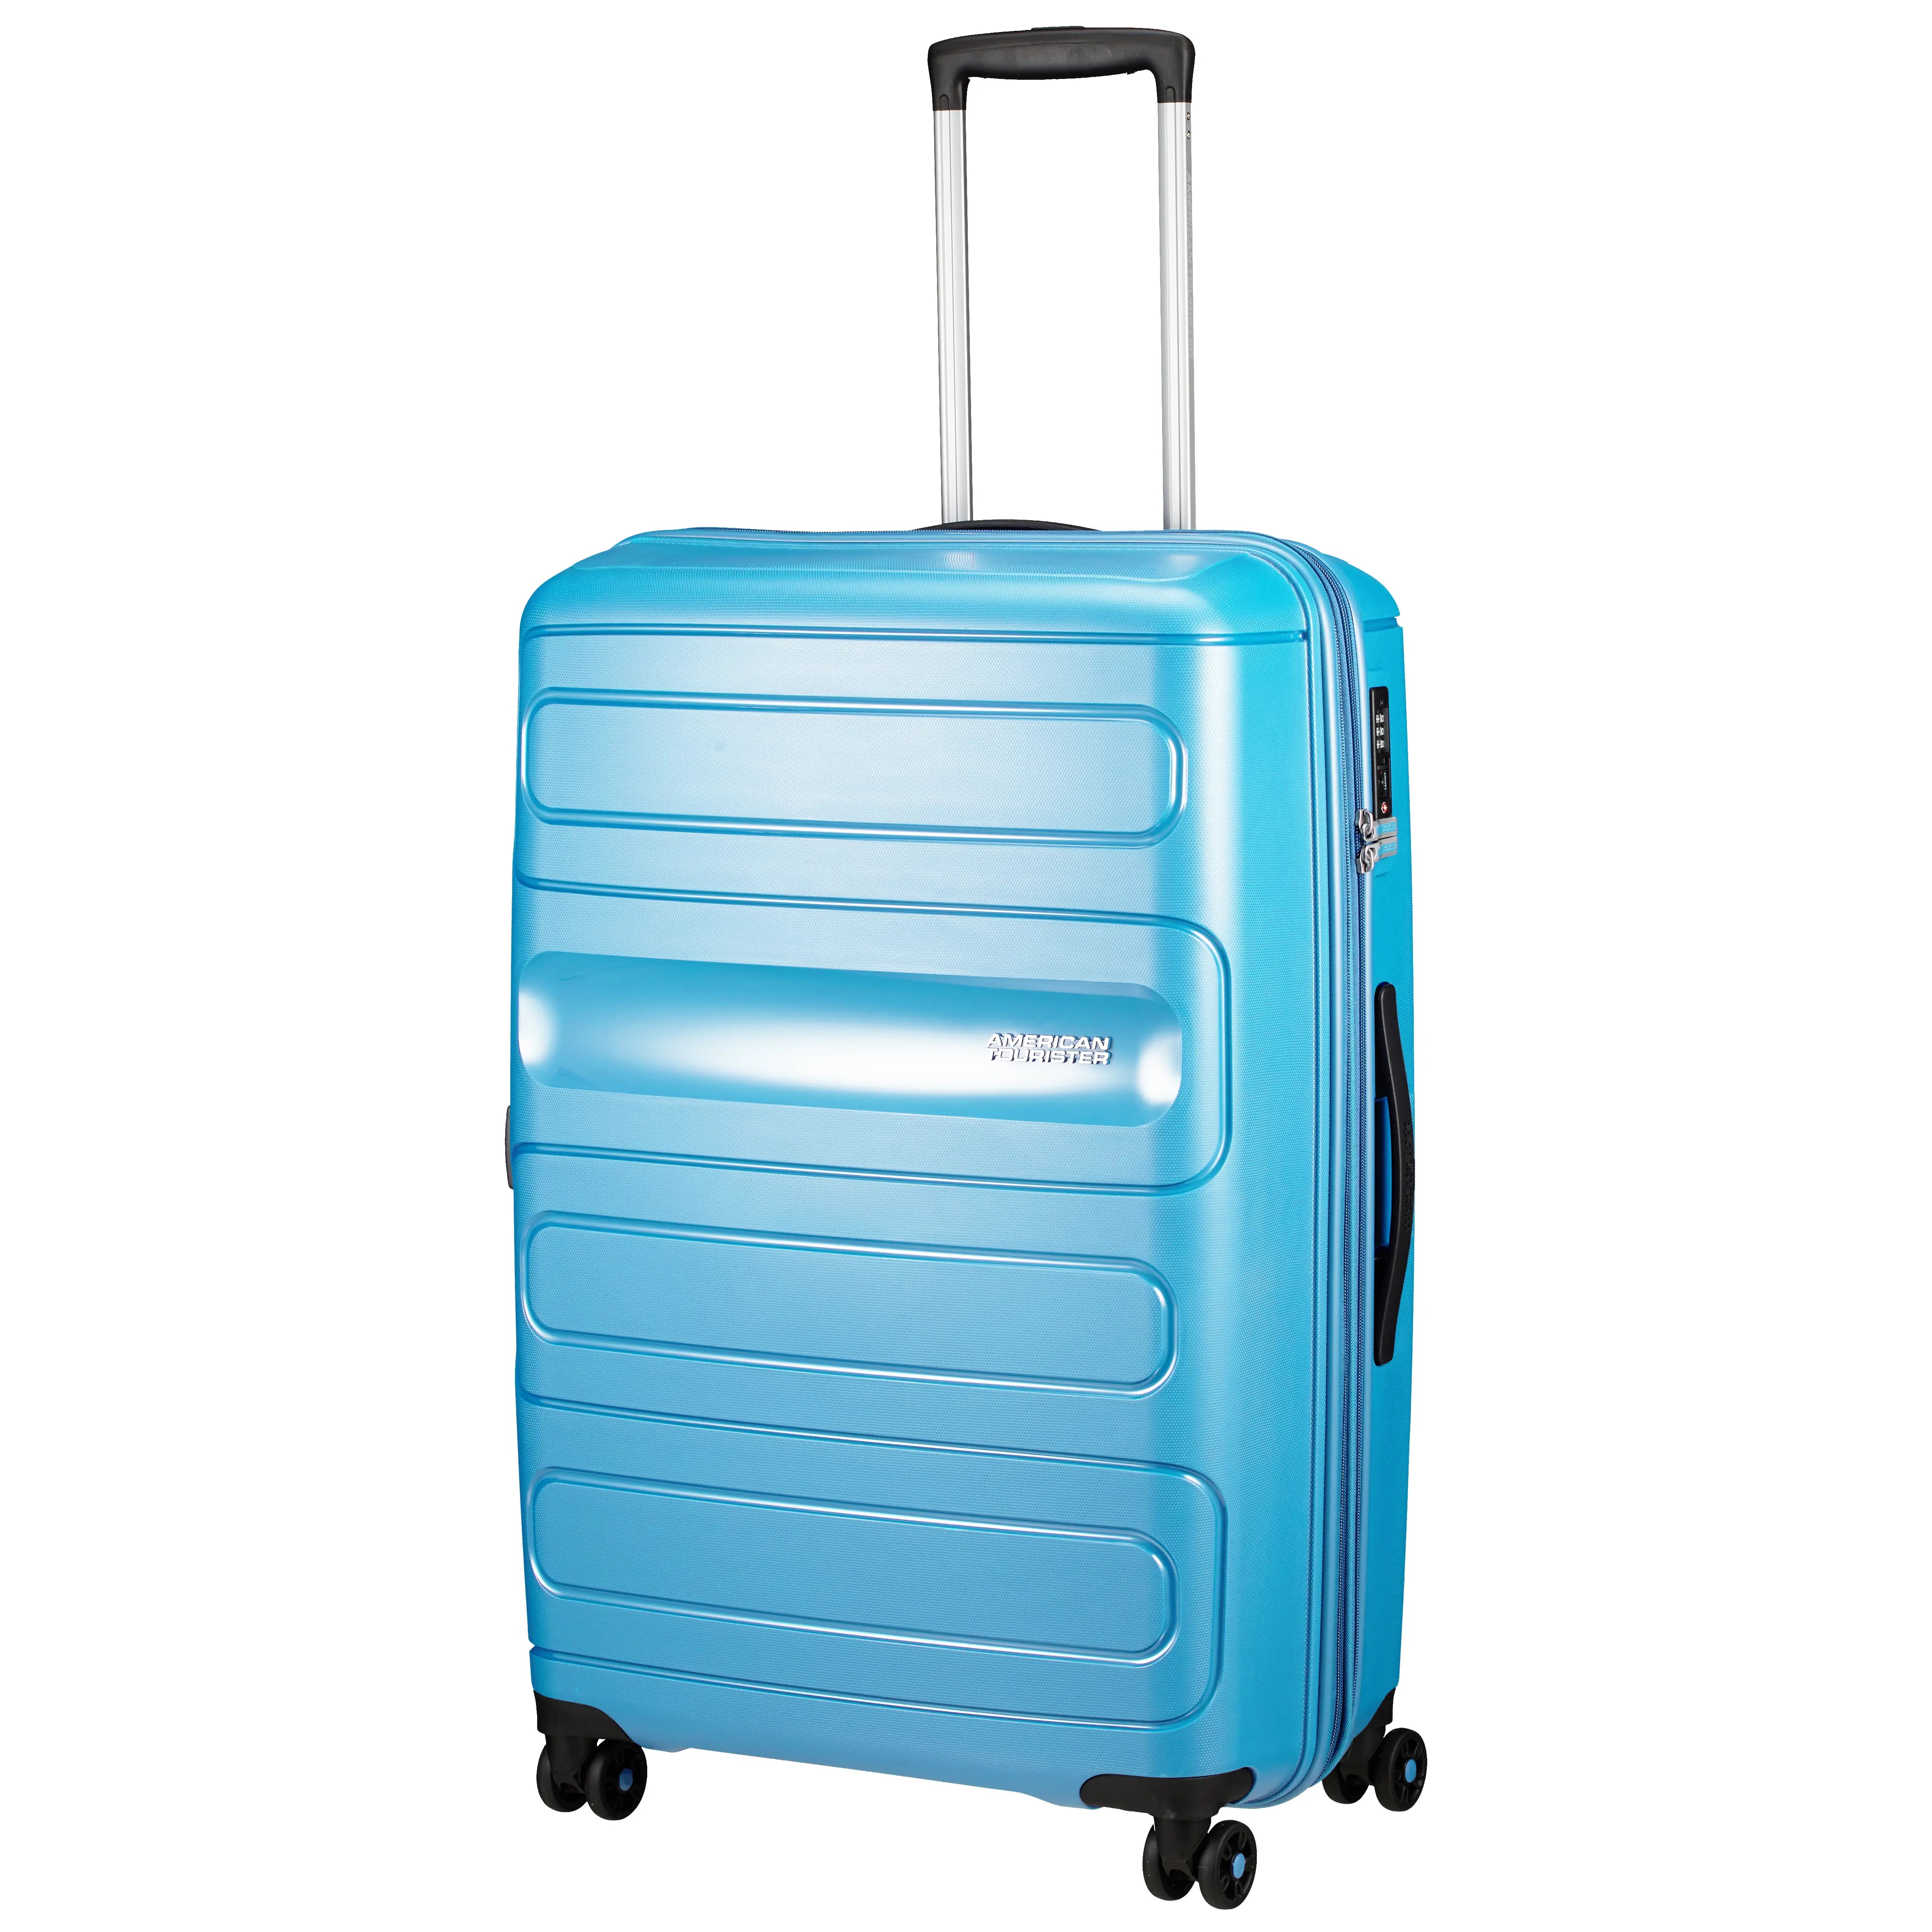 American Tourister Sunside 4-wheel trolley 77 cm - Totally Teal